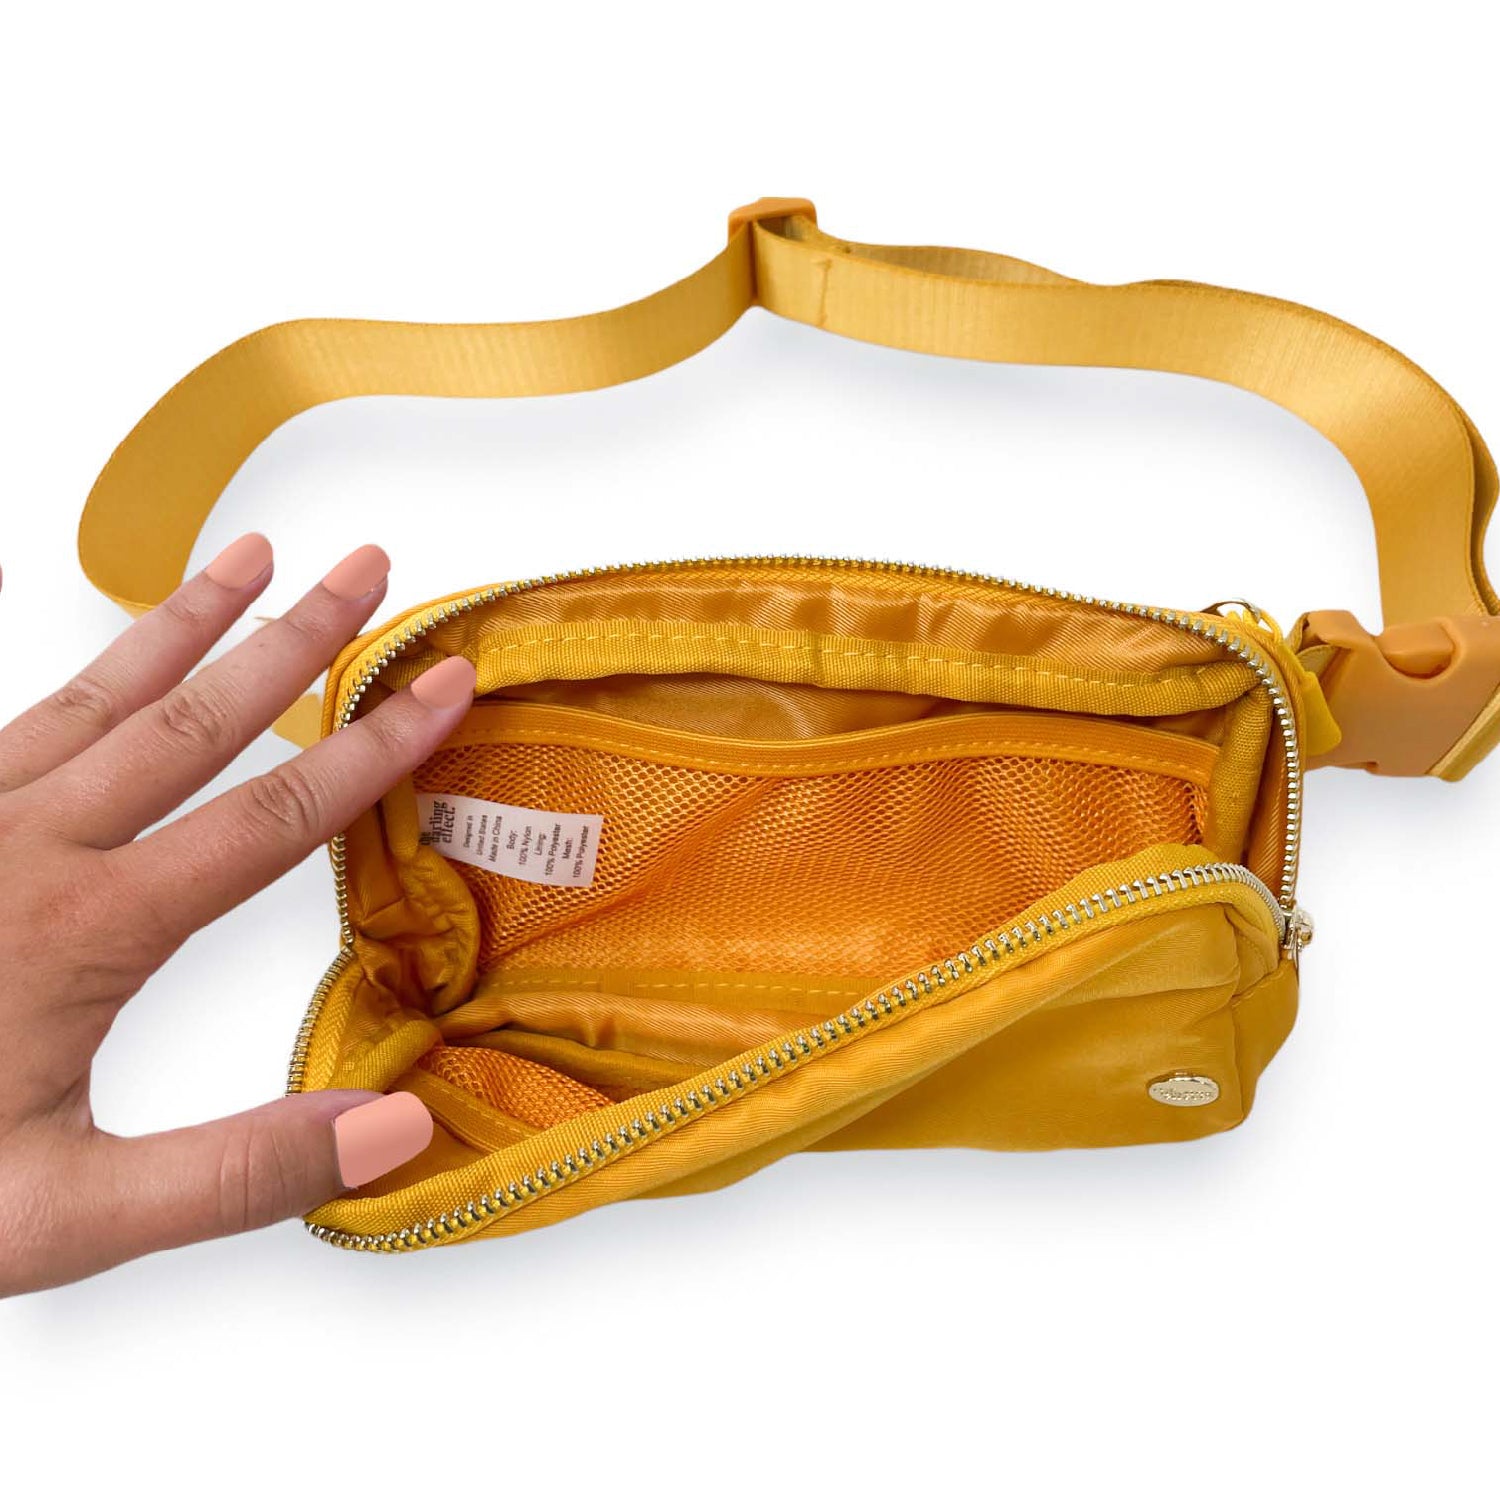 All You Need Belt Bag with Hairscarf - Golden Glow